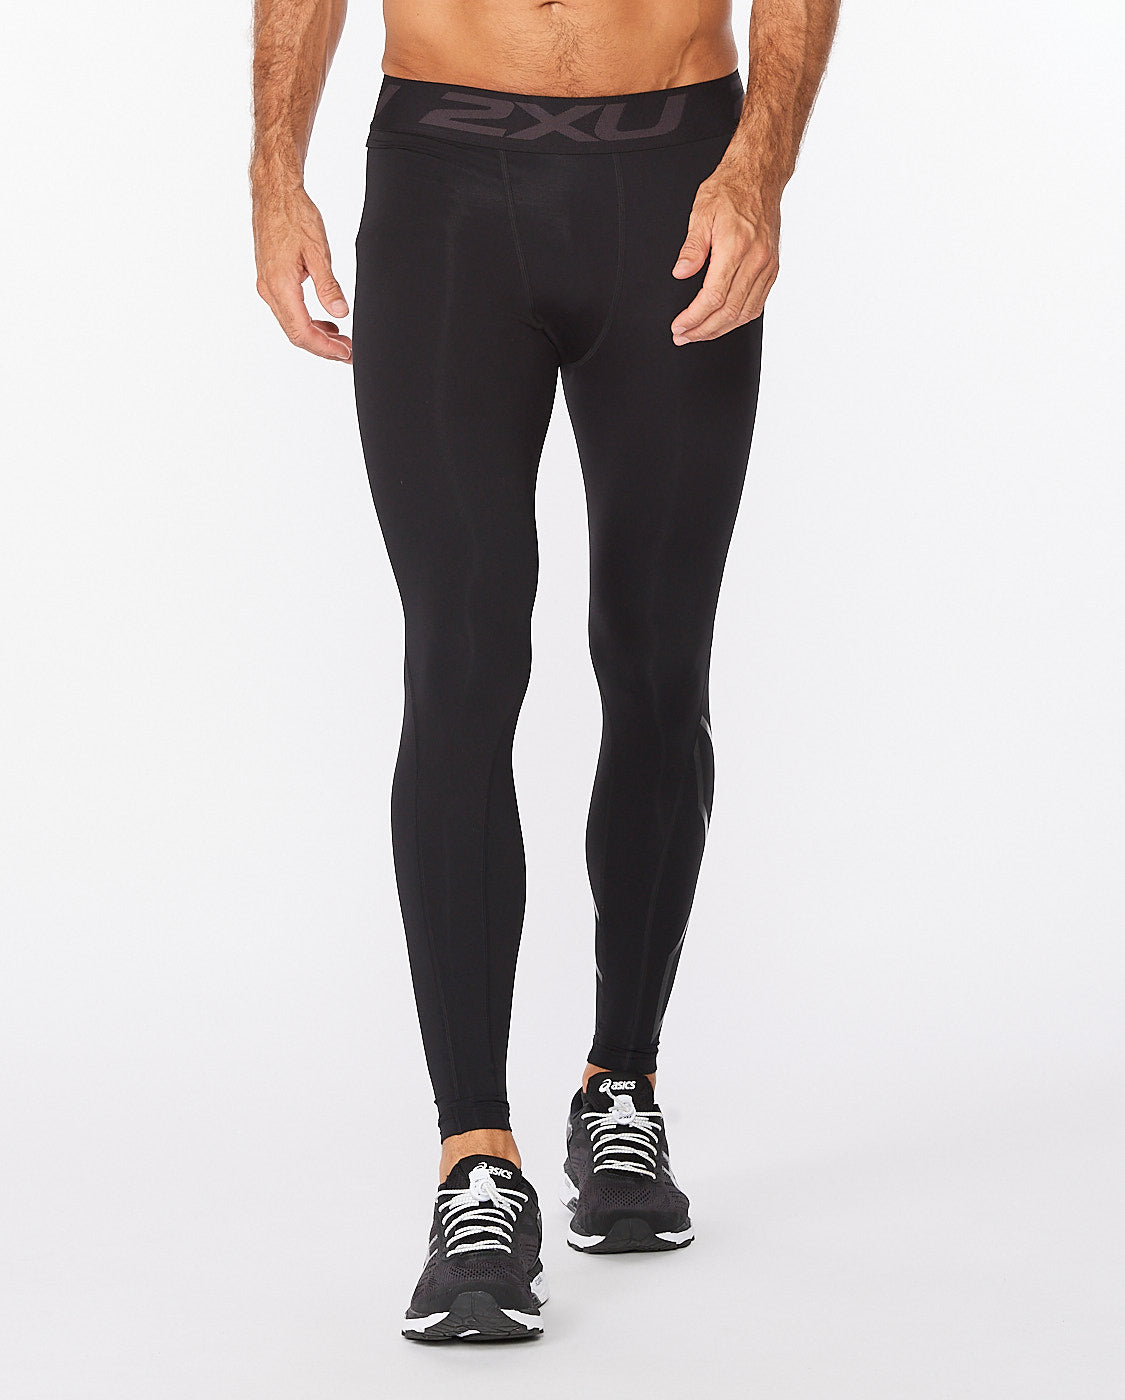 2xu, Other, 2xu Power Recovery Compression Tights Mens